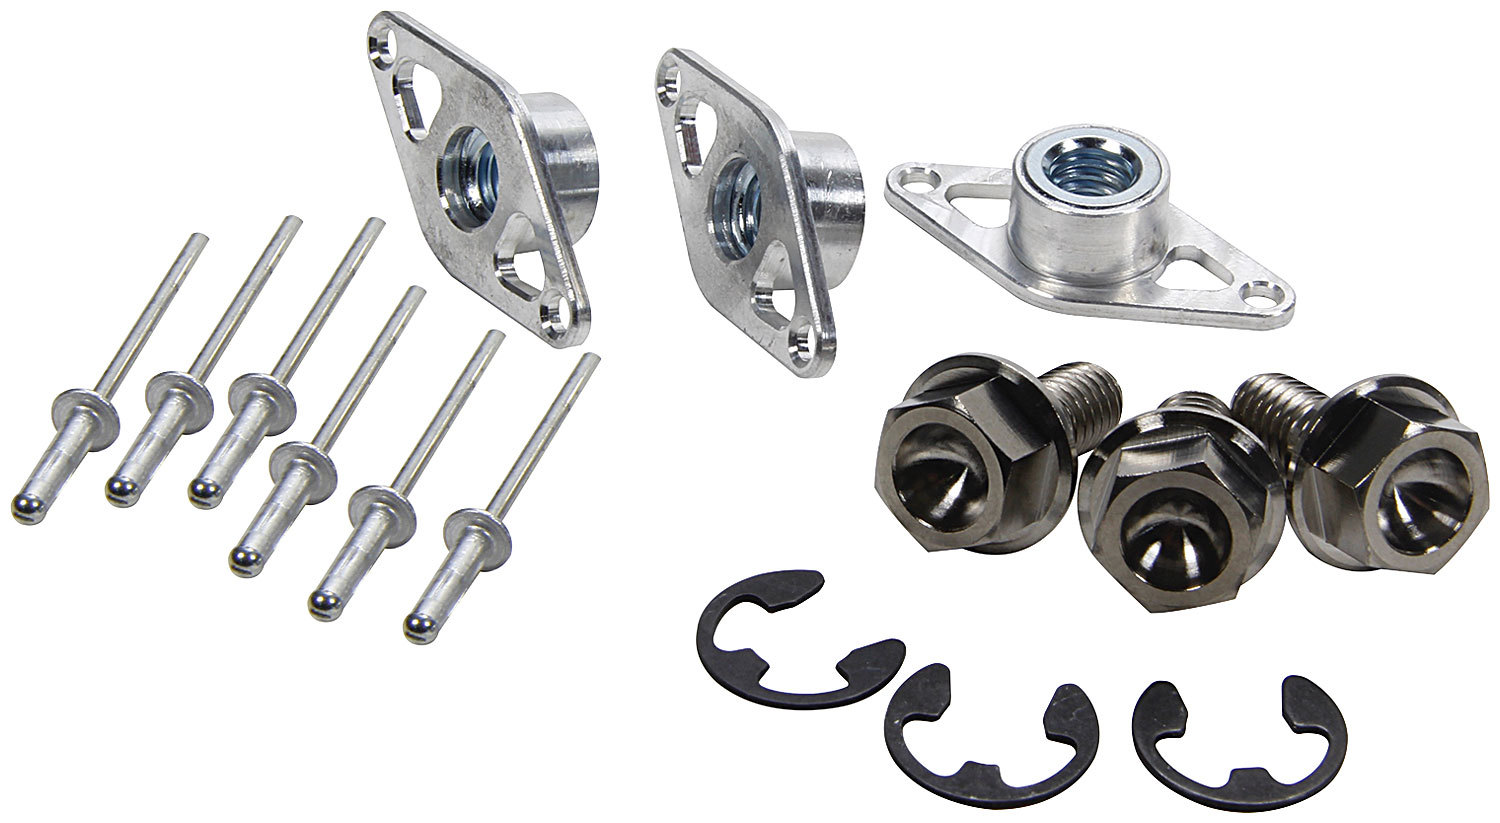 Allstar Performance 44266 Mud Cover Installation Kit, Screw-In Inserts / Rivets Included, 1-3/8 in Spring, Titanium, Kit